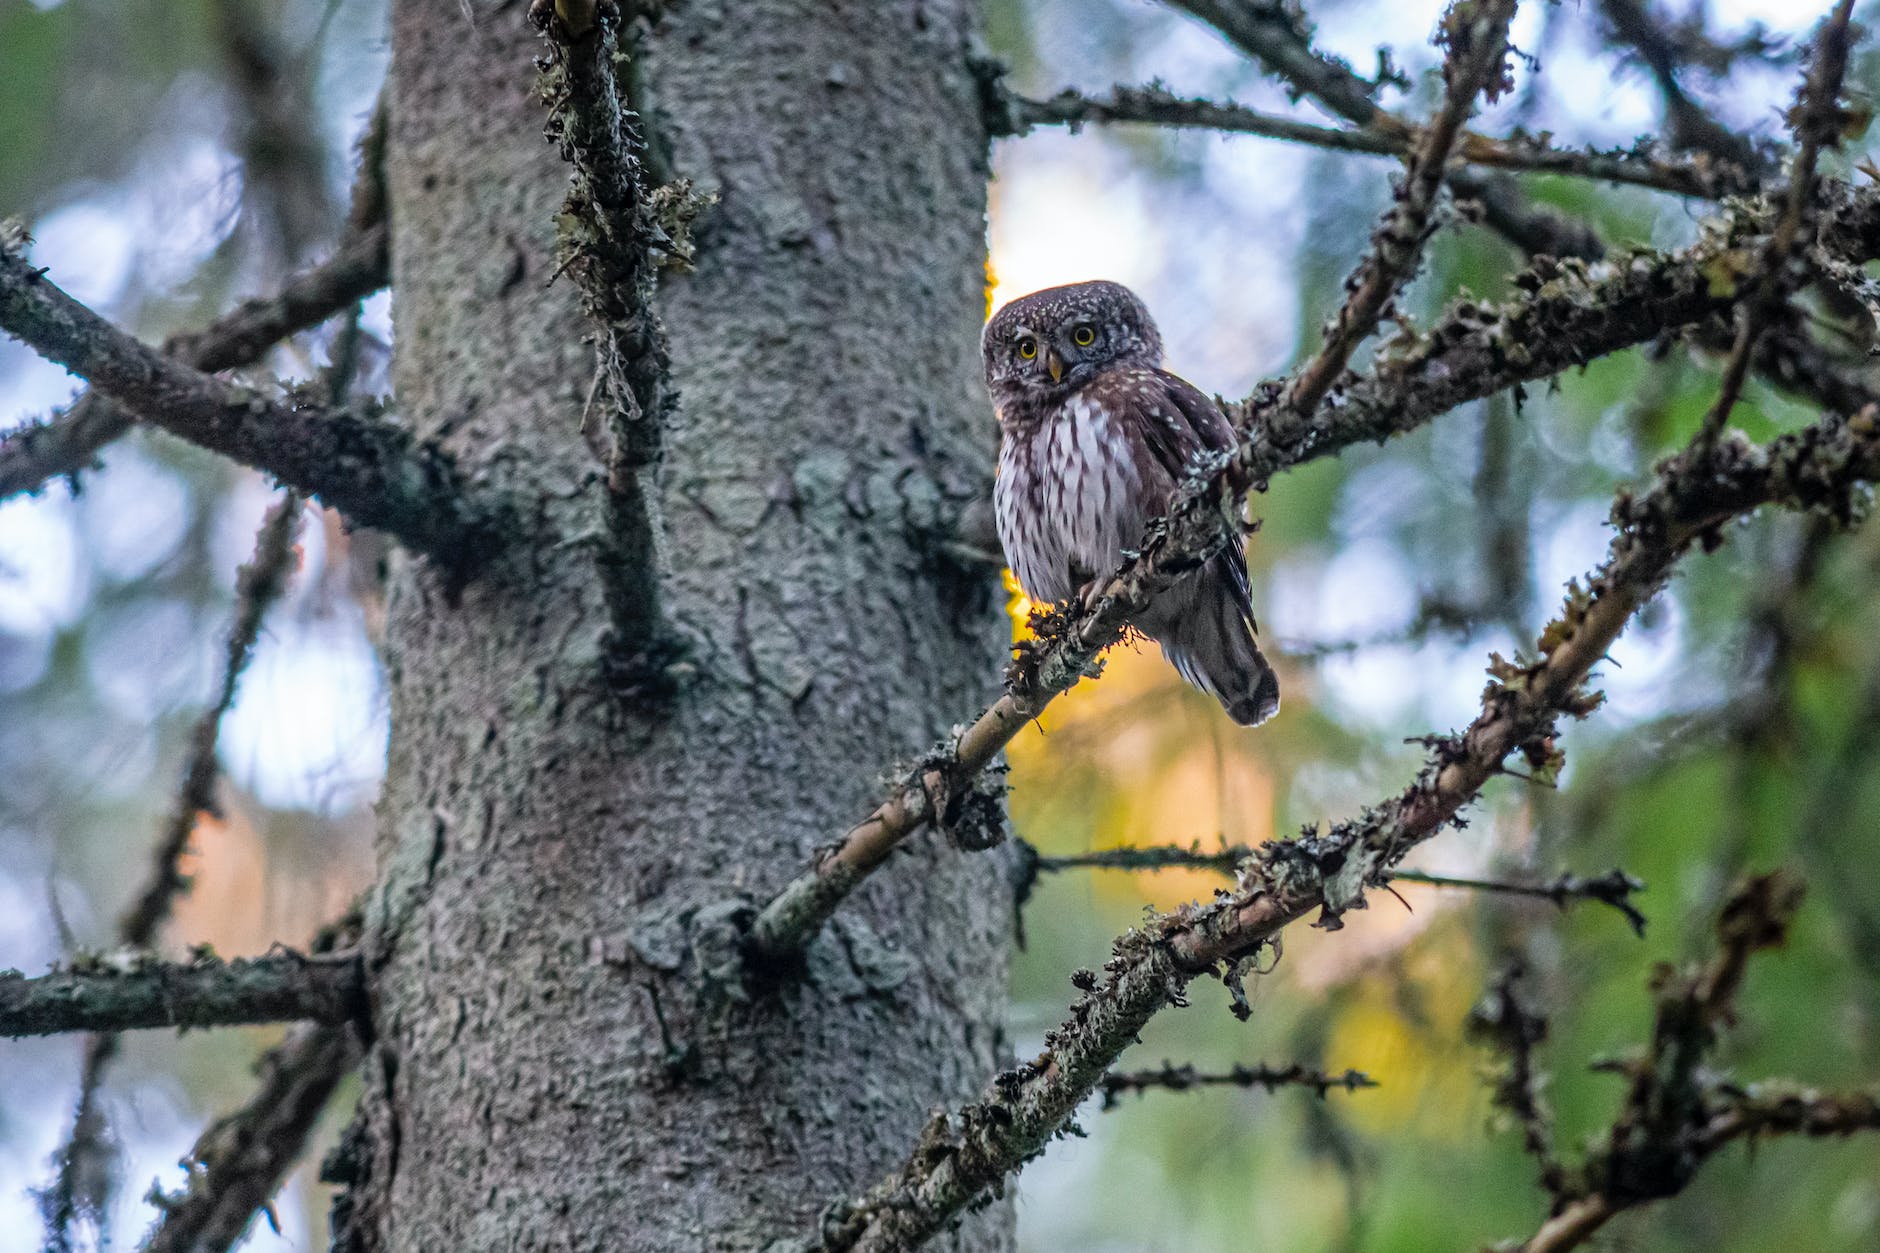 pygmy owl perched on tree branch